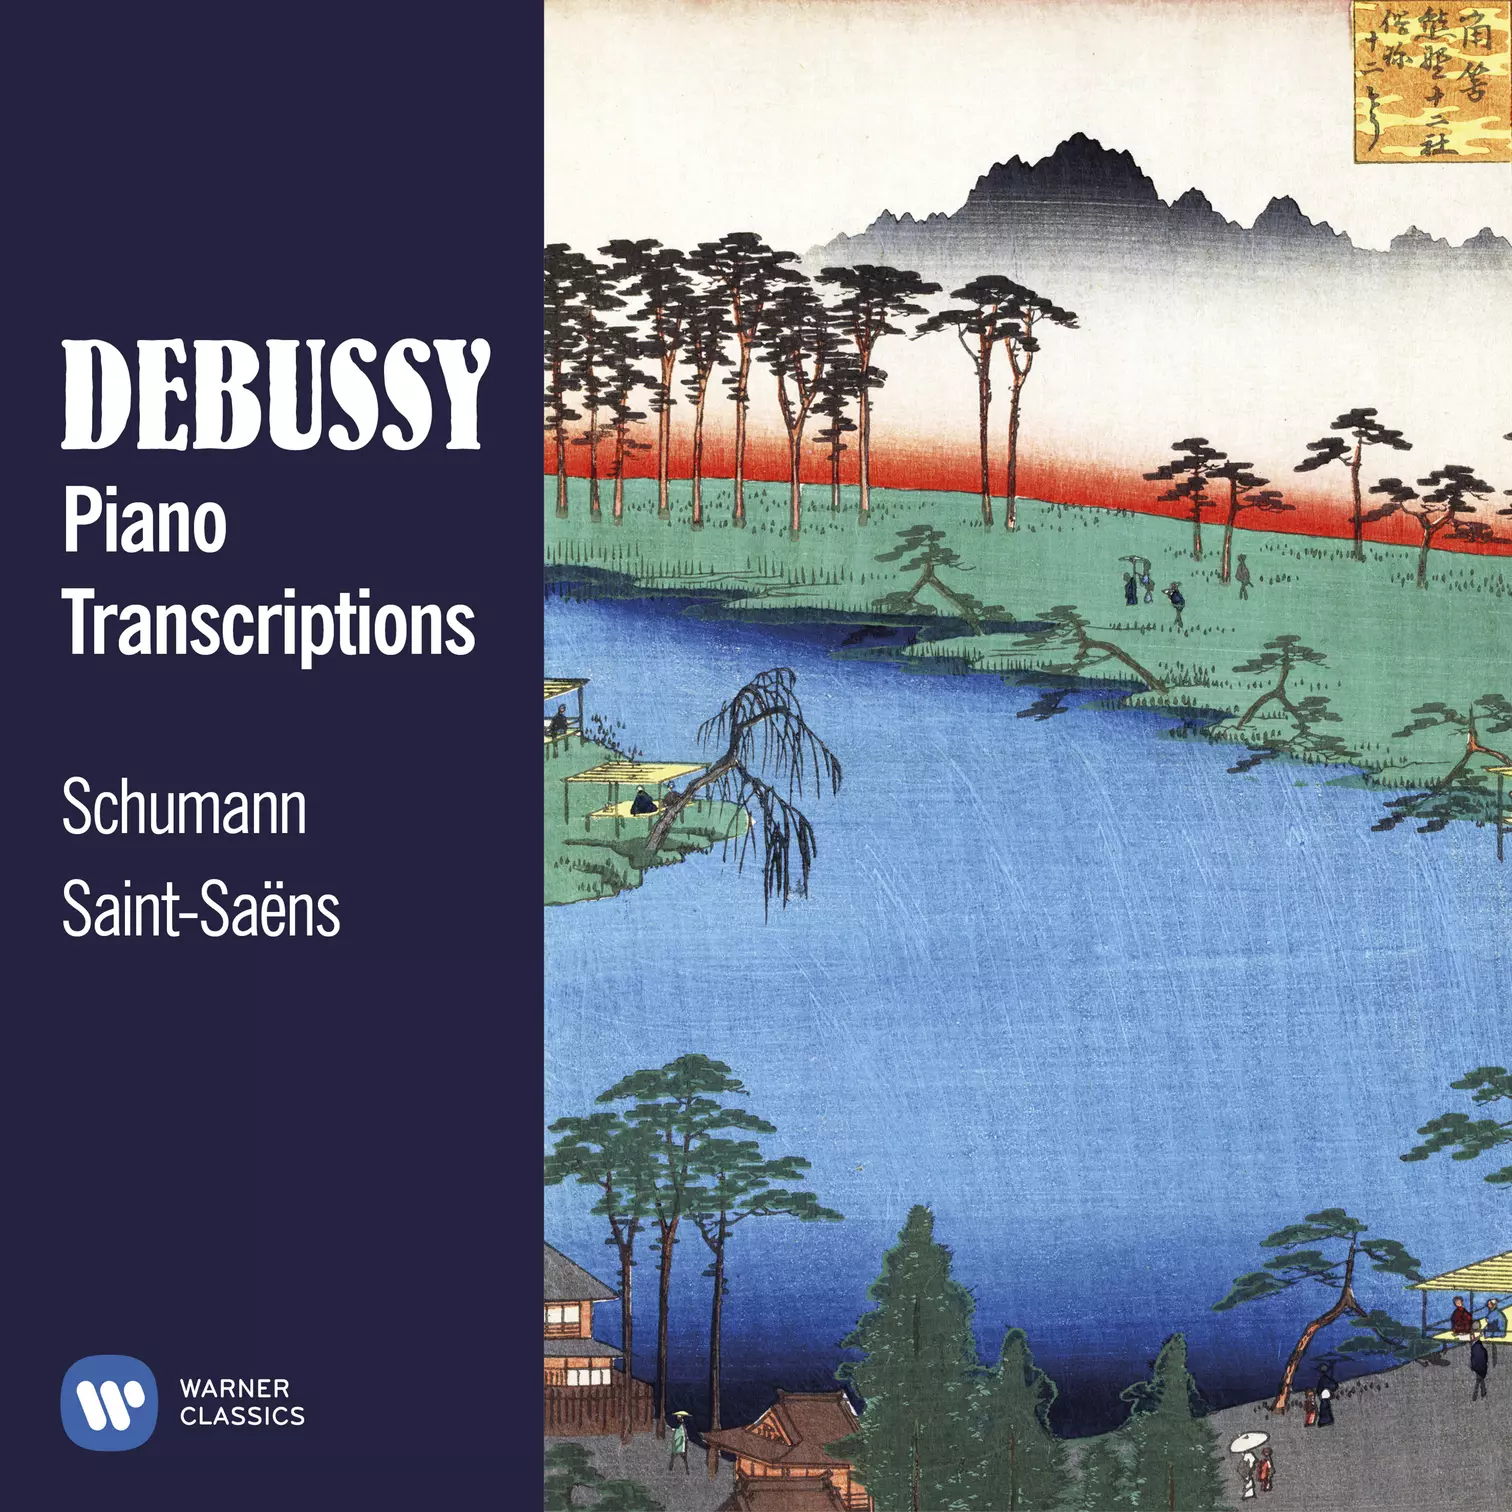 Piano Transcriptions by Claude Debussy